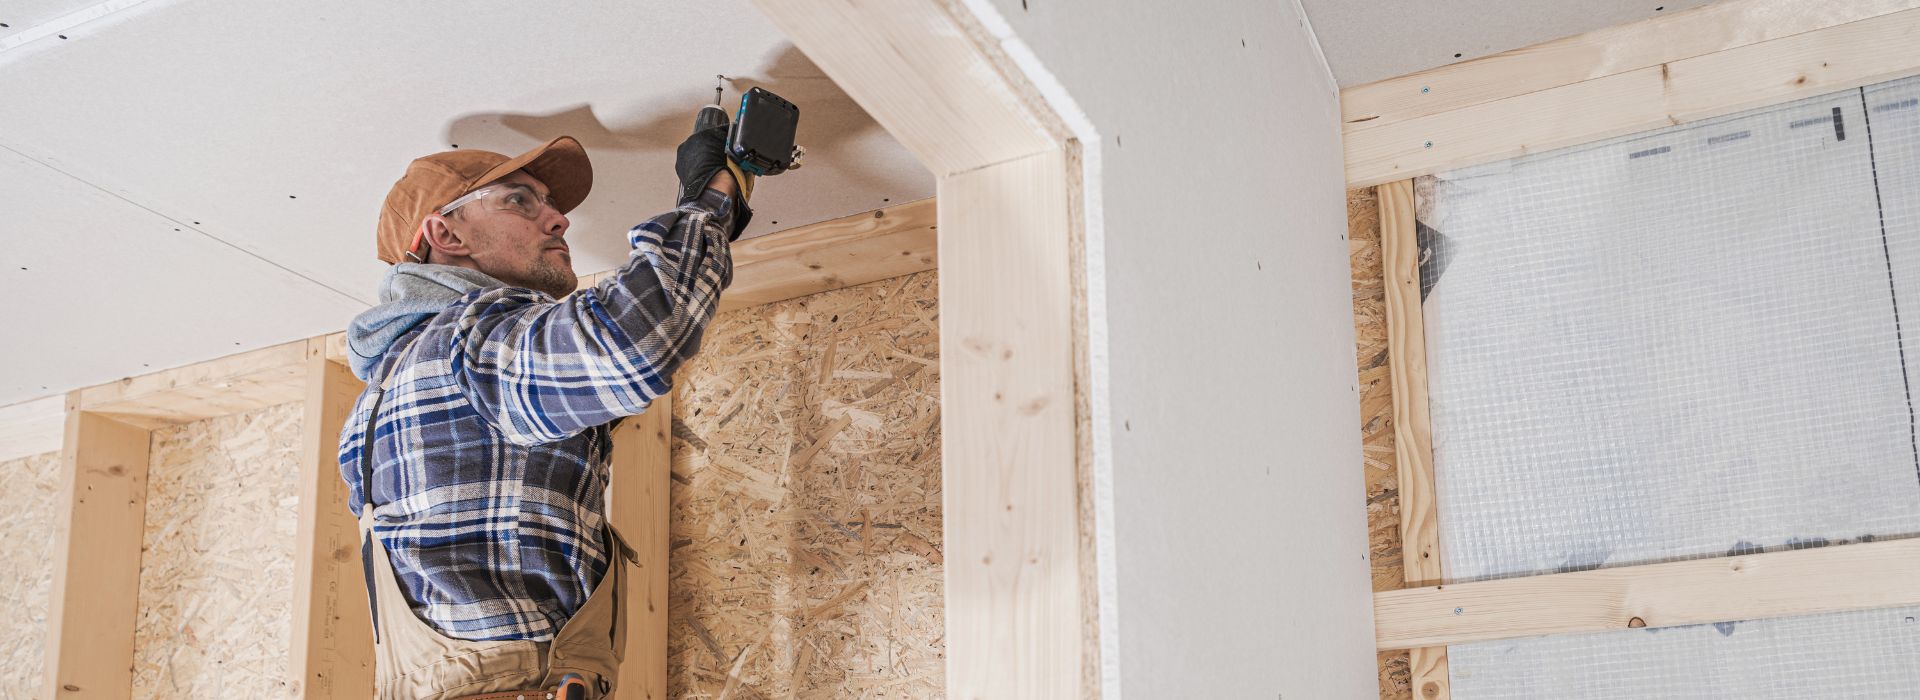 A Comprehensive Guide to Hiring the Right Drywall Contractor